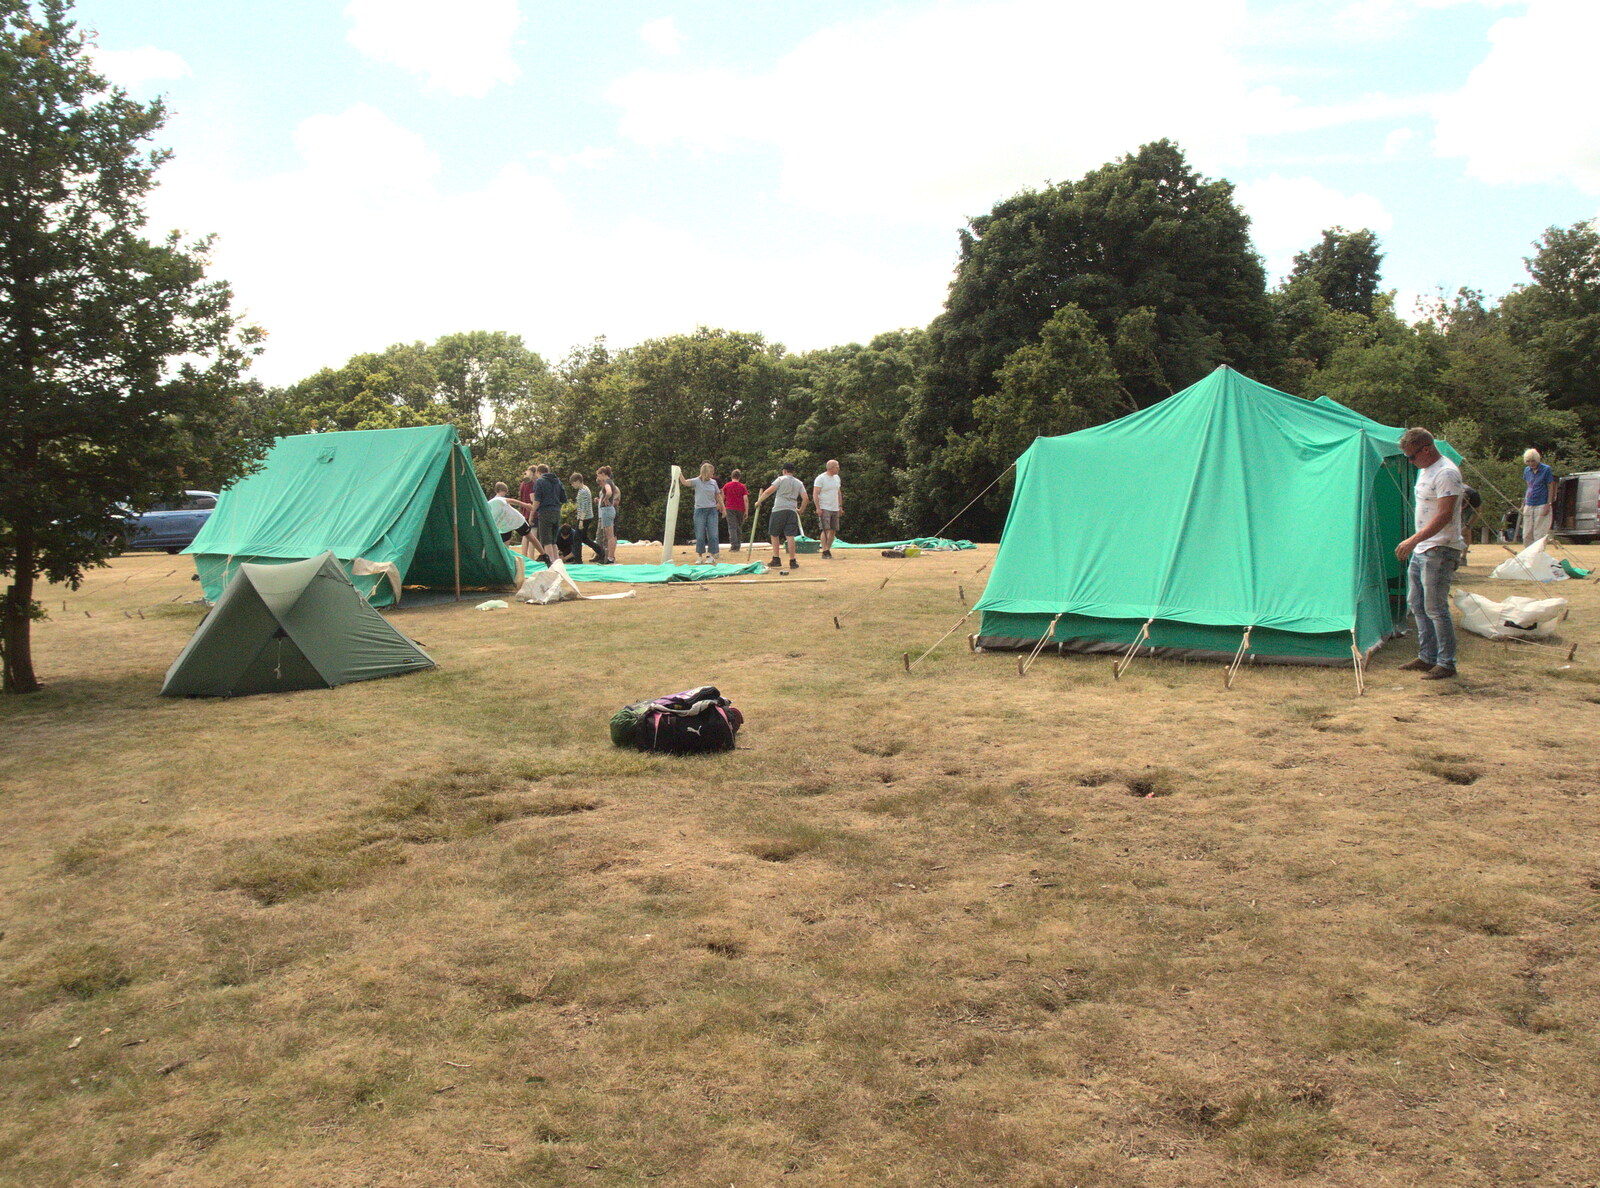 At Hallowtree, the tents are taken down from A Fire, a Fête, and a Scout Camp, Hallowtree, Suffolk - 30th June 2022